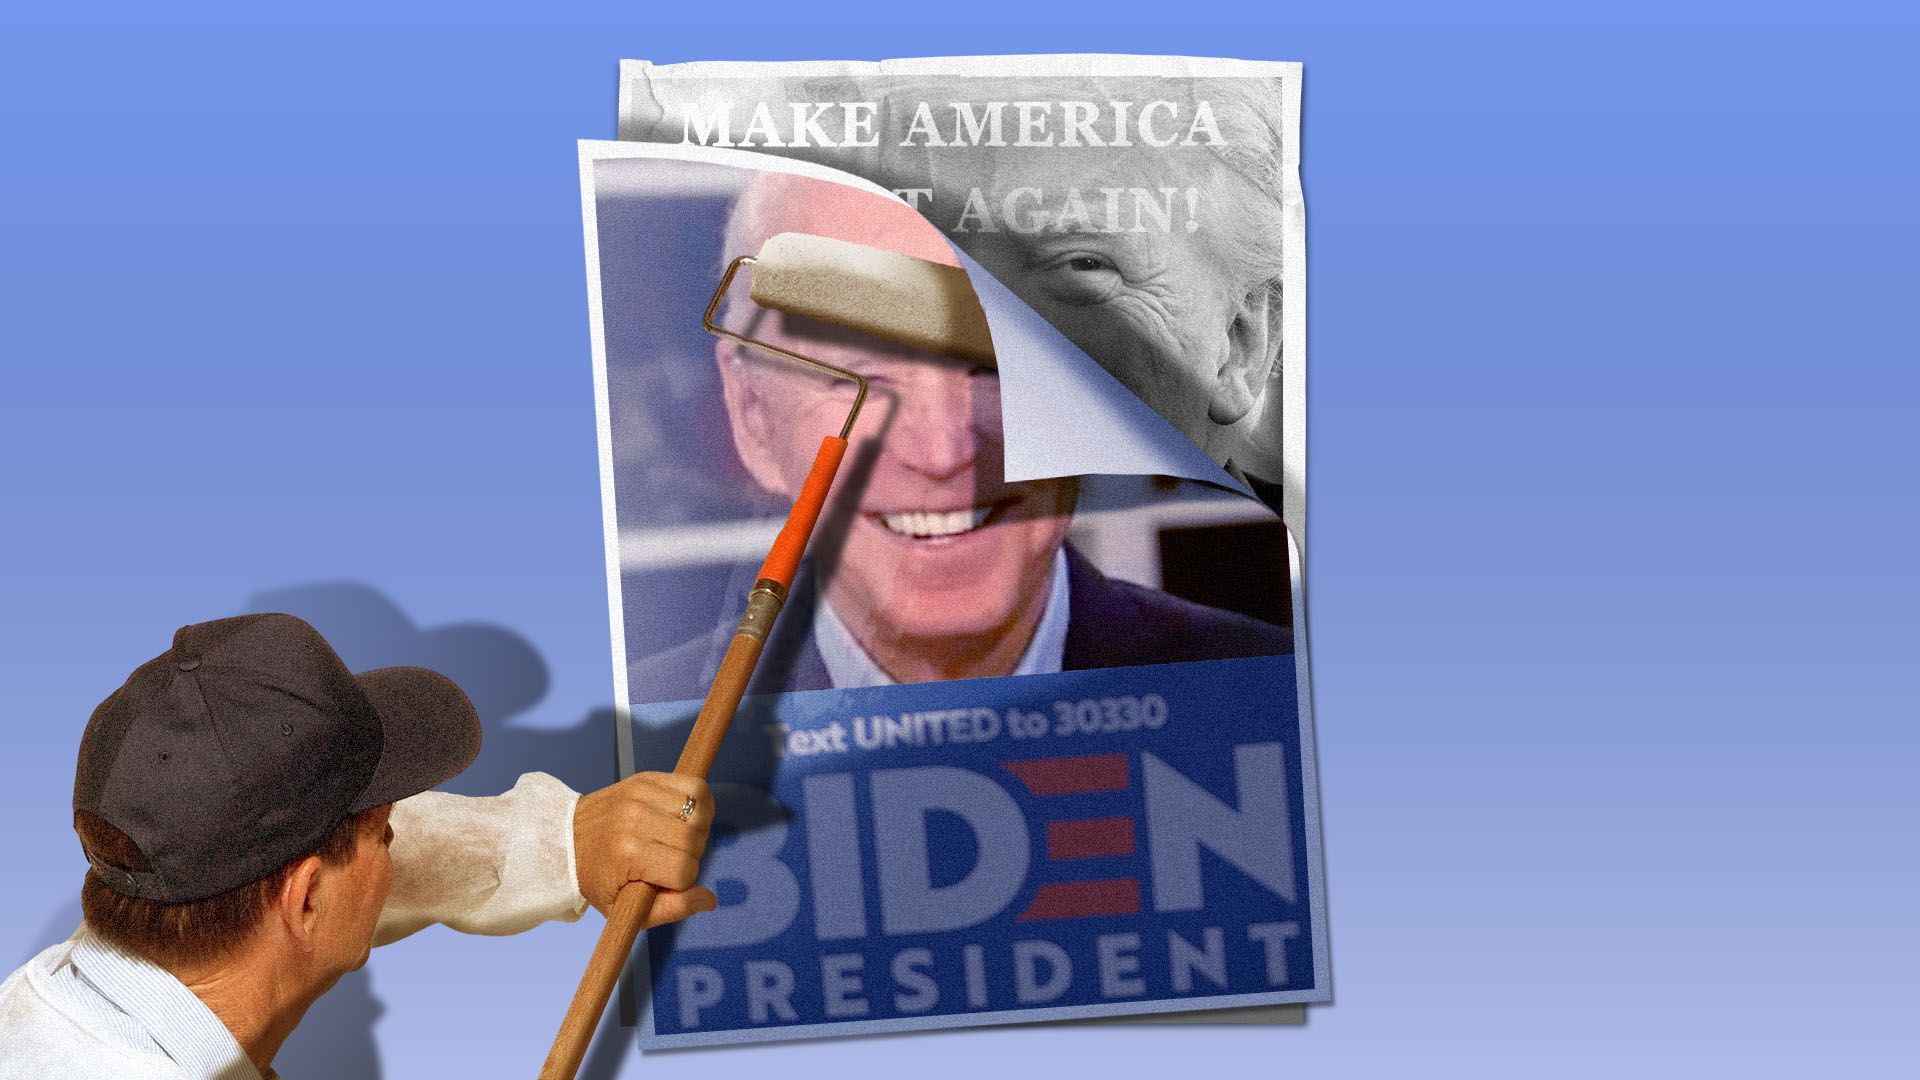 Illustration of a person putting up a poster of Joe Biden over an older poster of President Trump